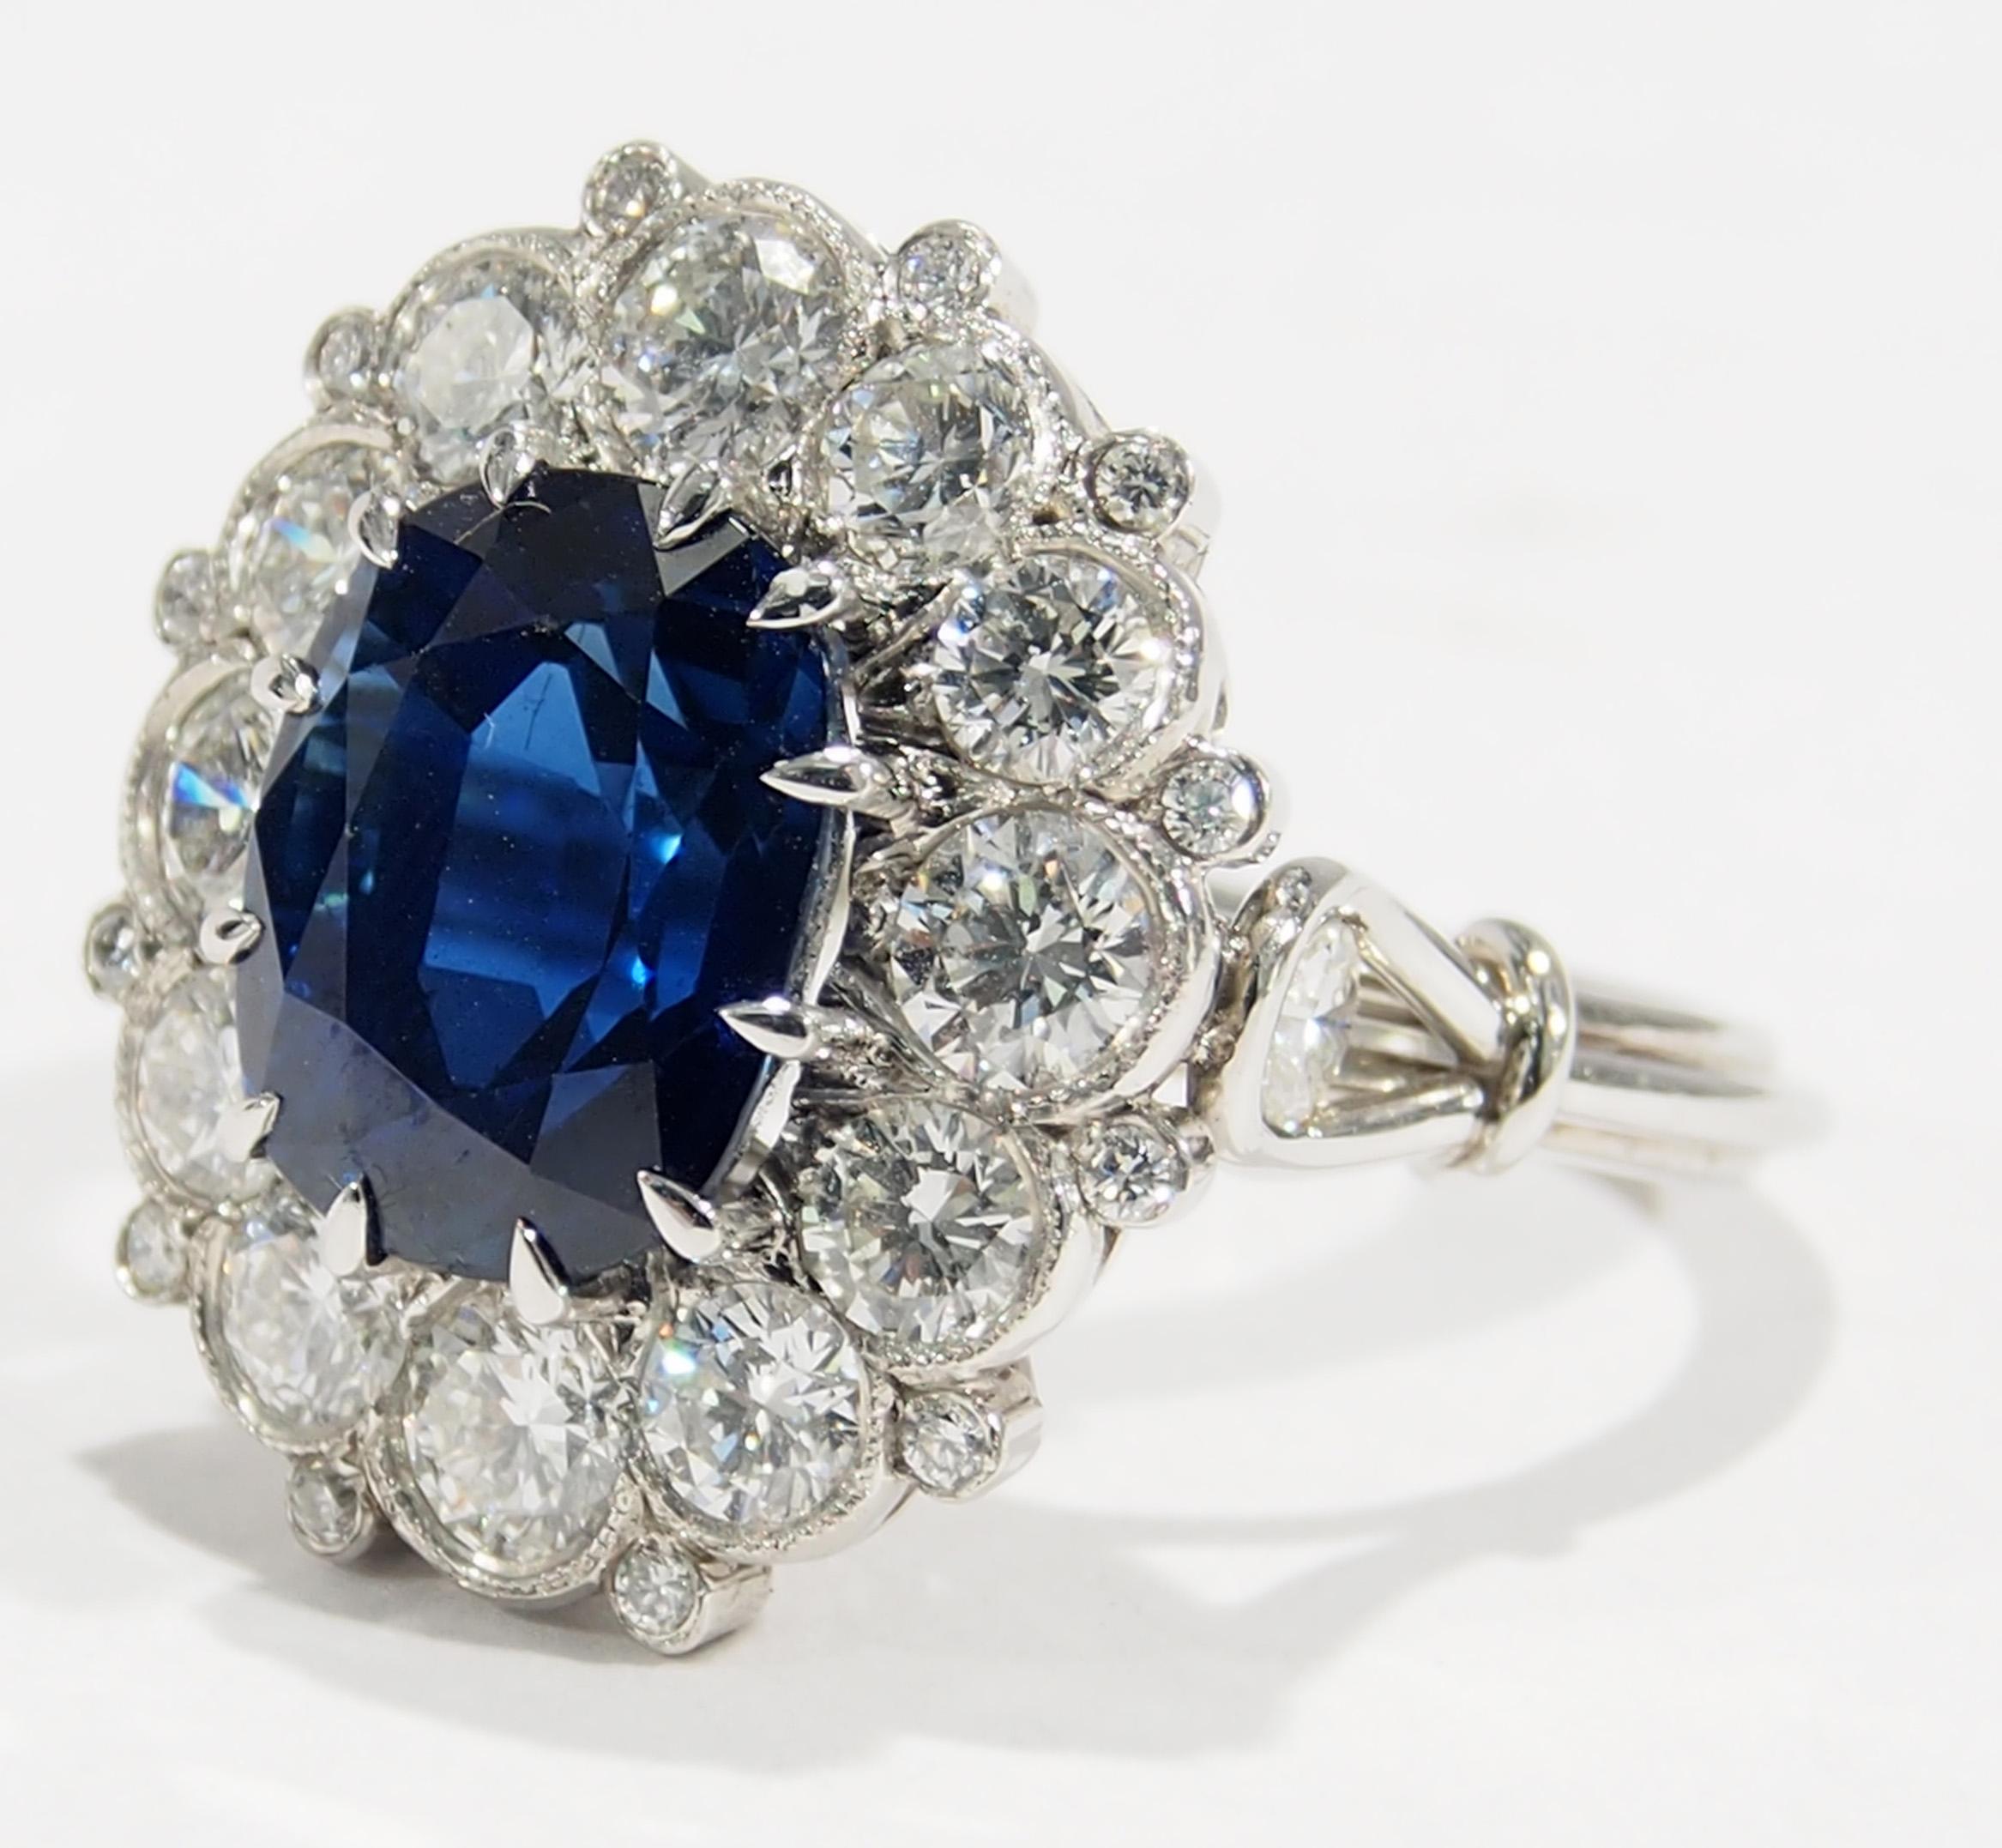 This is a stunning Platinum Diamond and Siam Sapphire Handmade Ring. A heirloom quality Ring with (26) Round Brilliant Cut Diamonds, approximately 9.45ctw, D-F in Color, VVS-VS in Clarity that enhance a Siam Sapphire, approximately 7.05ct. This